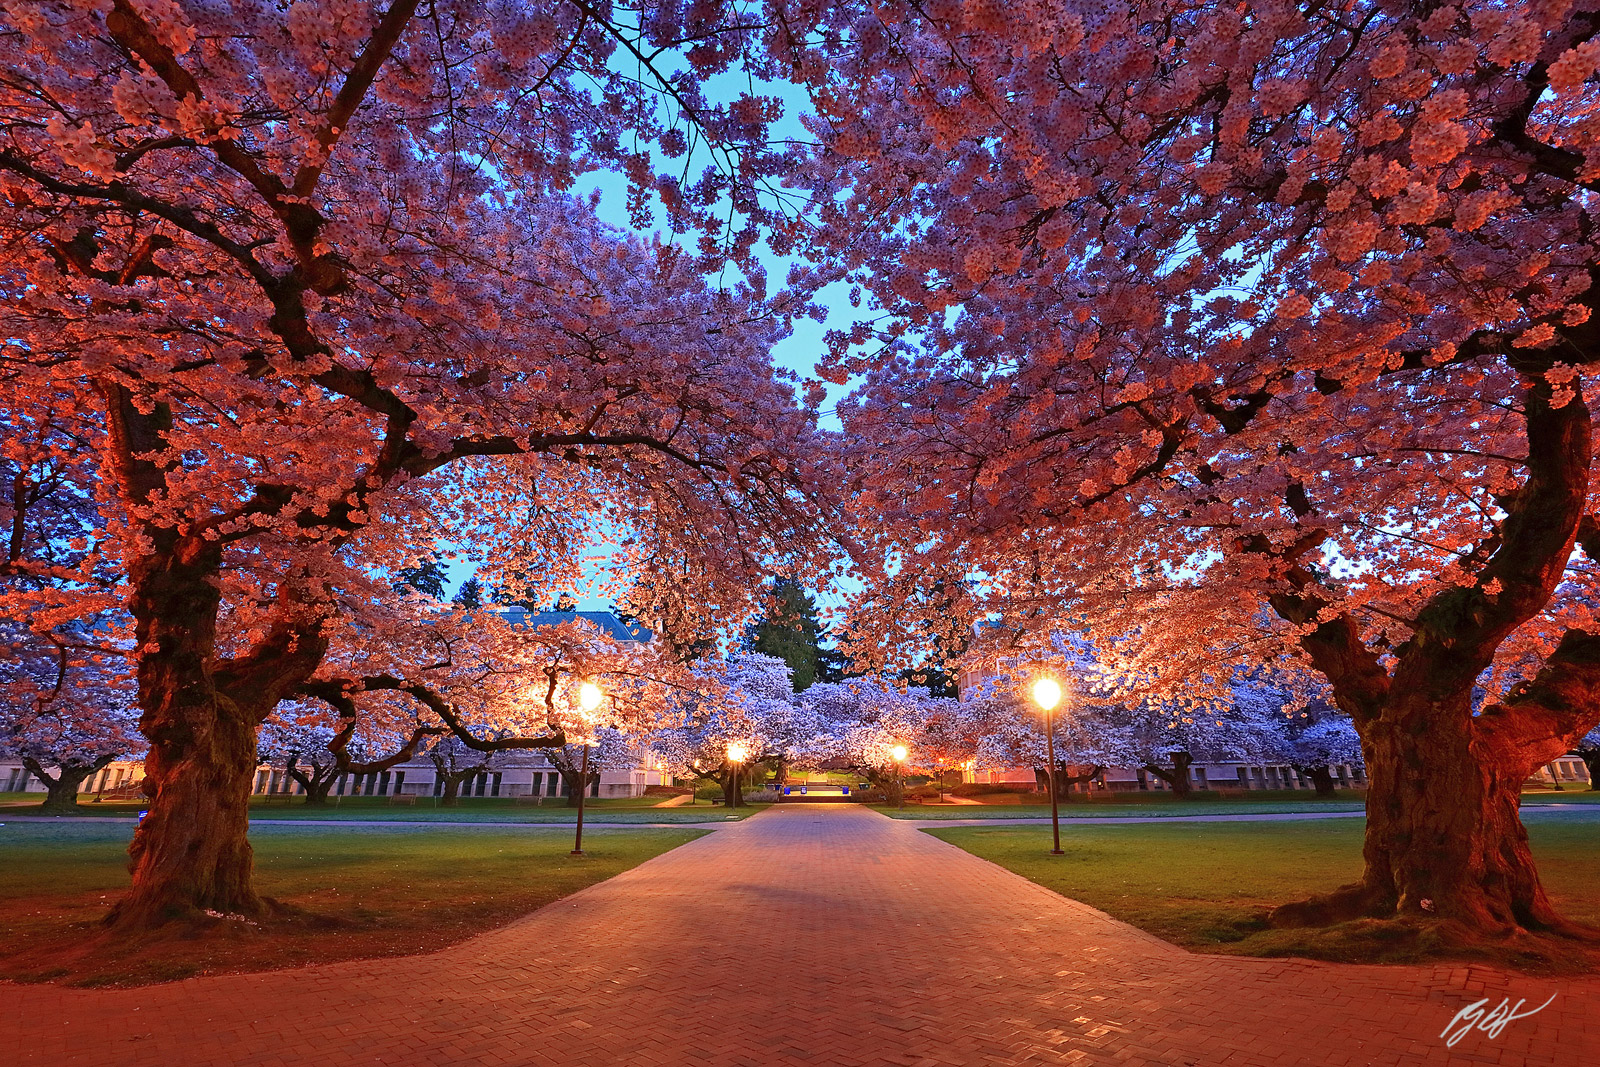 Cherry trees in Bloom in the University of Washington Quad in Seattle, Washington